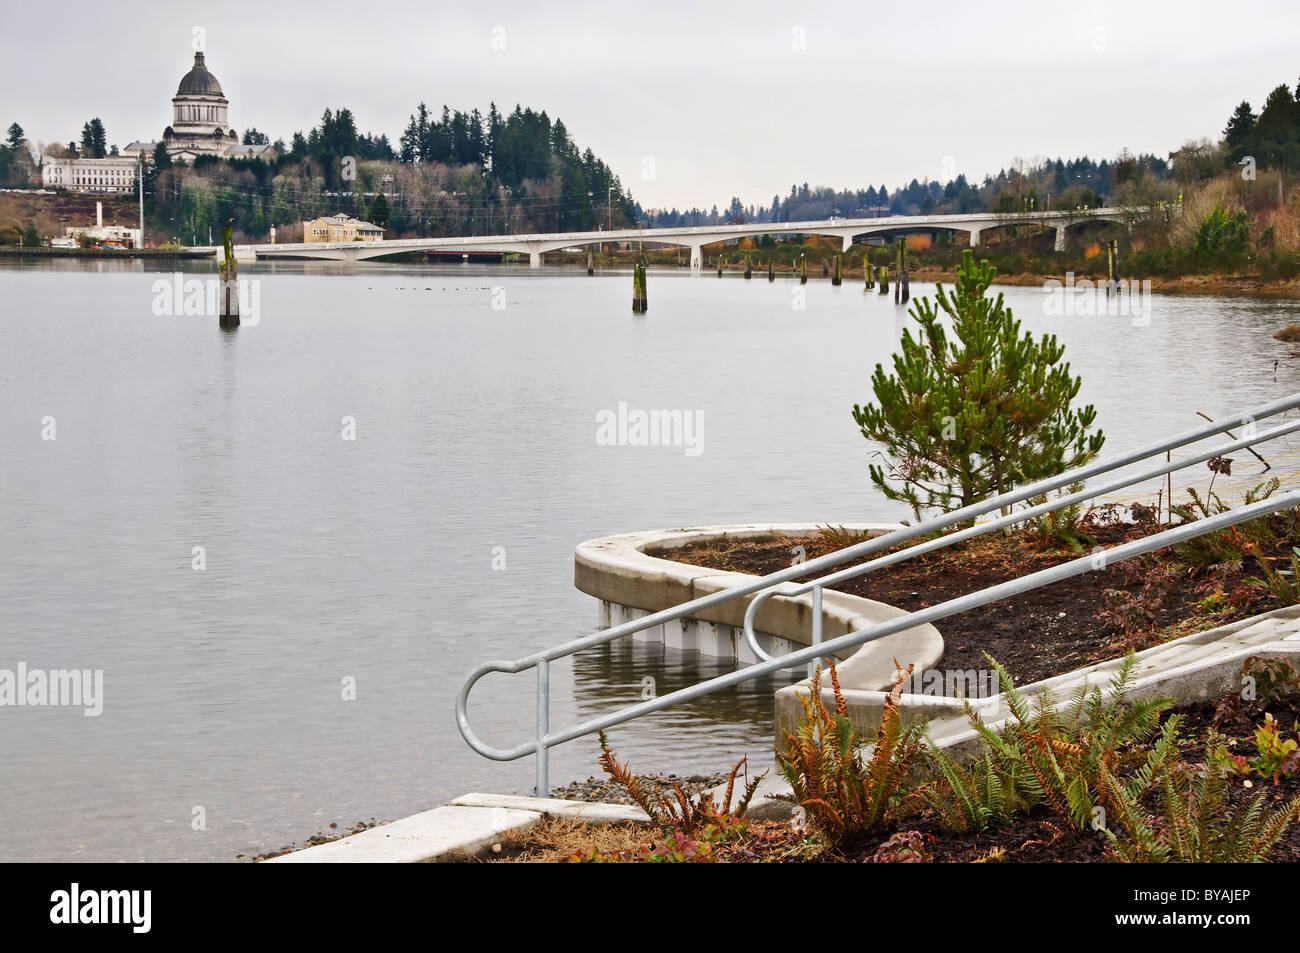 Extremely high king tide in Olympia's Budd Inlet viewed from Rotary Park on the west side of the bay. Stock Photo